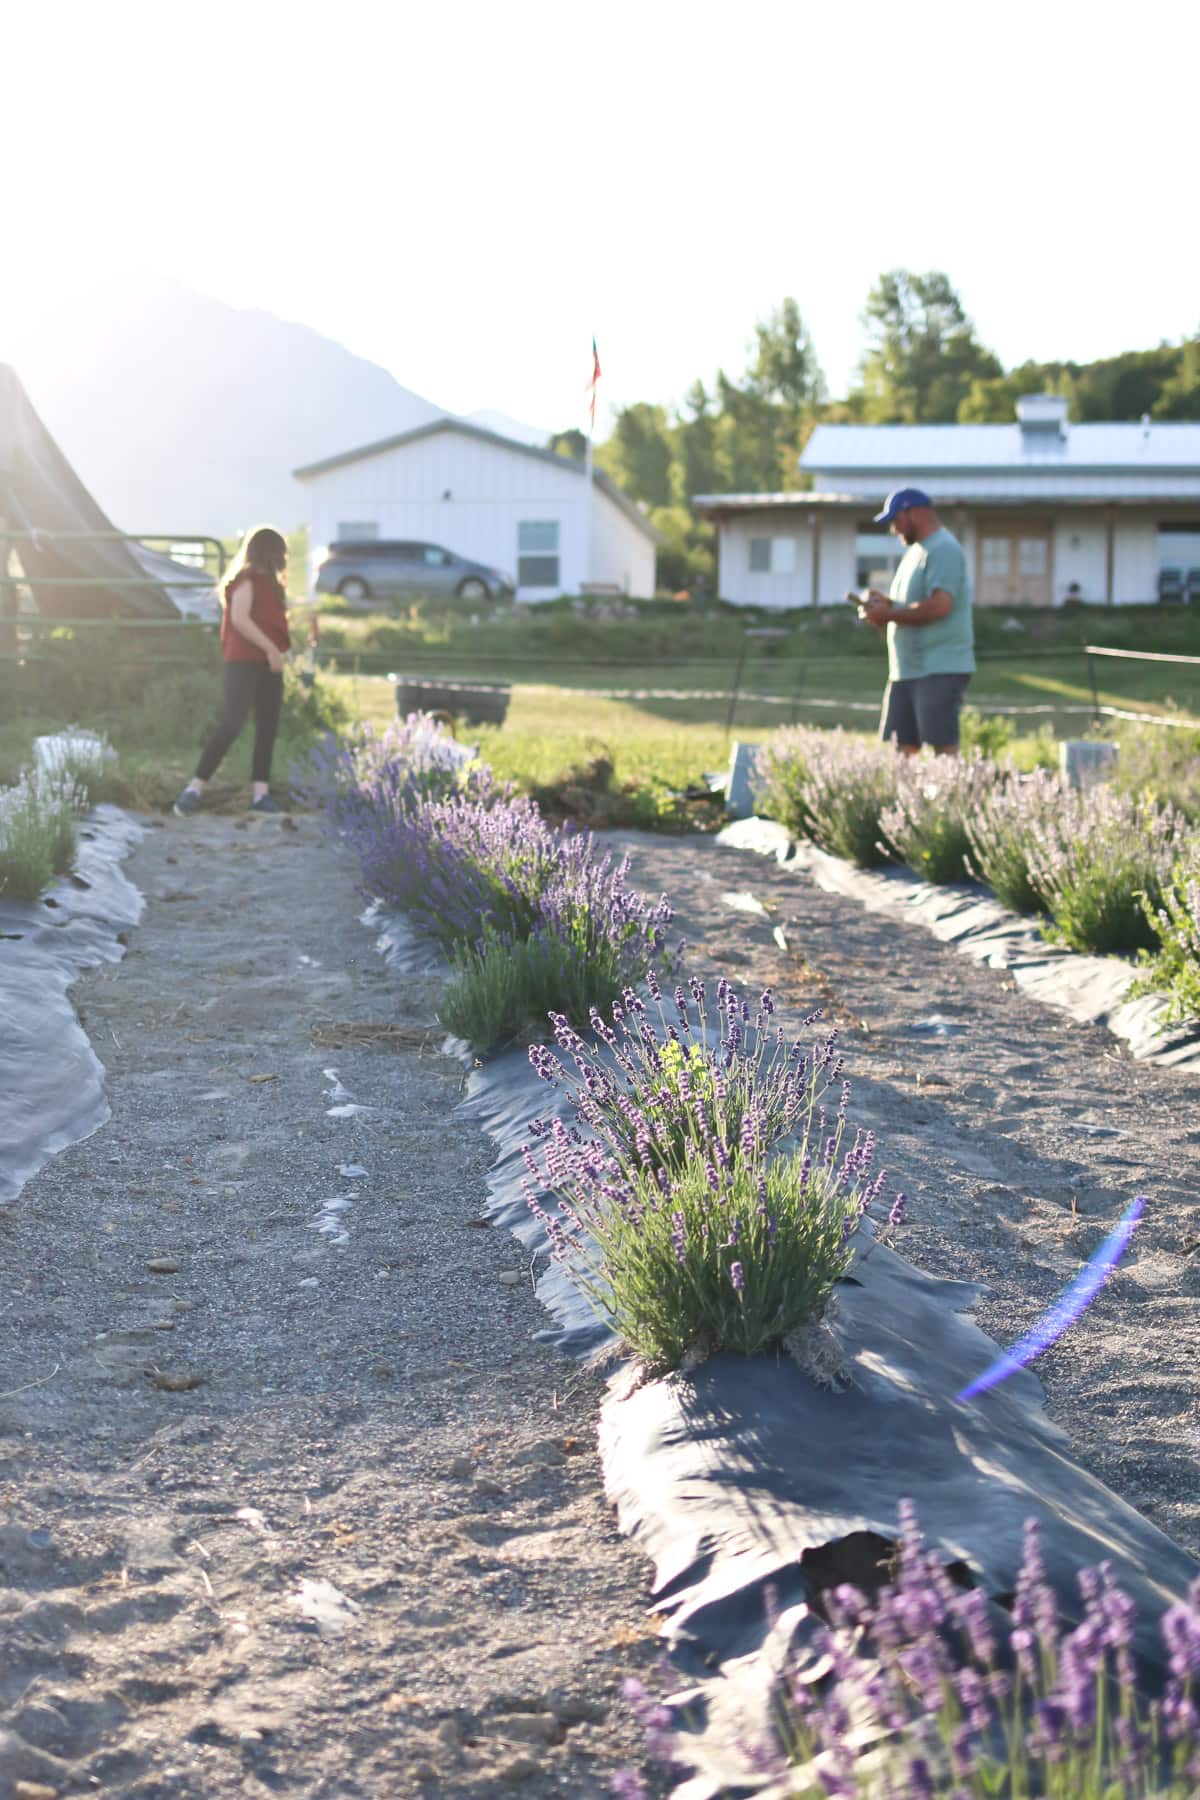 A man and woman working together on a lavender farm